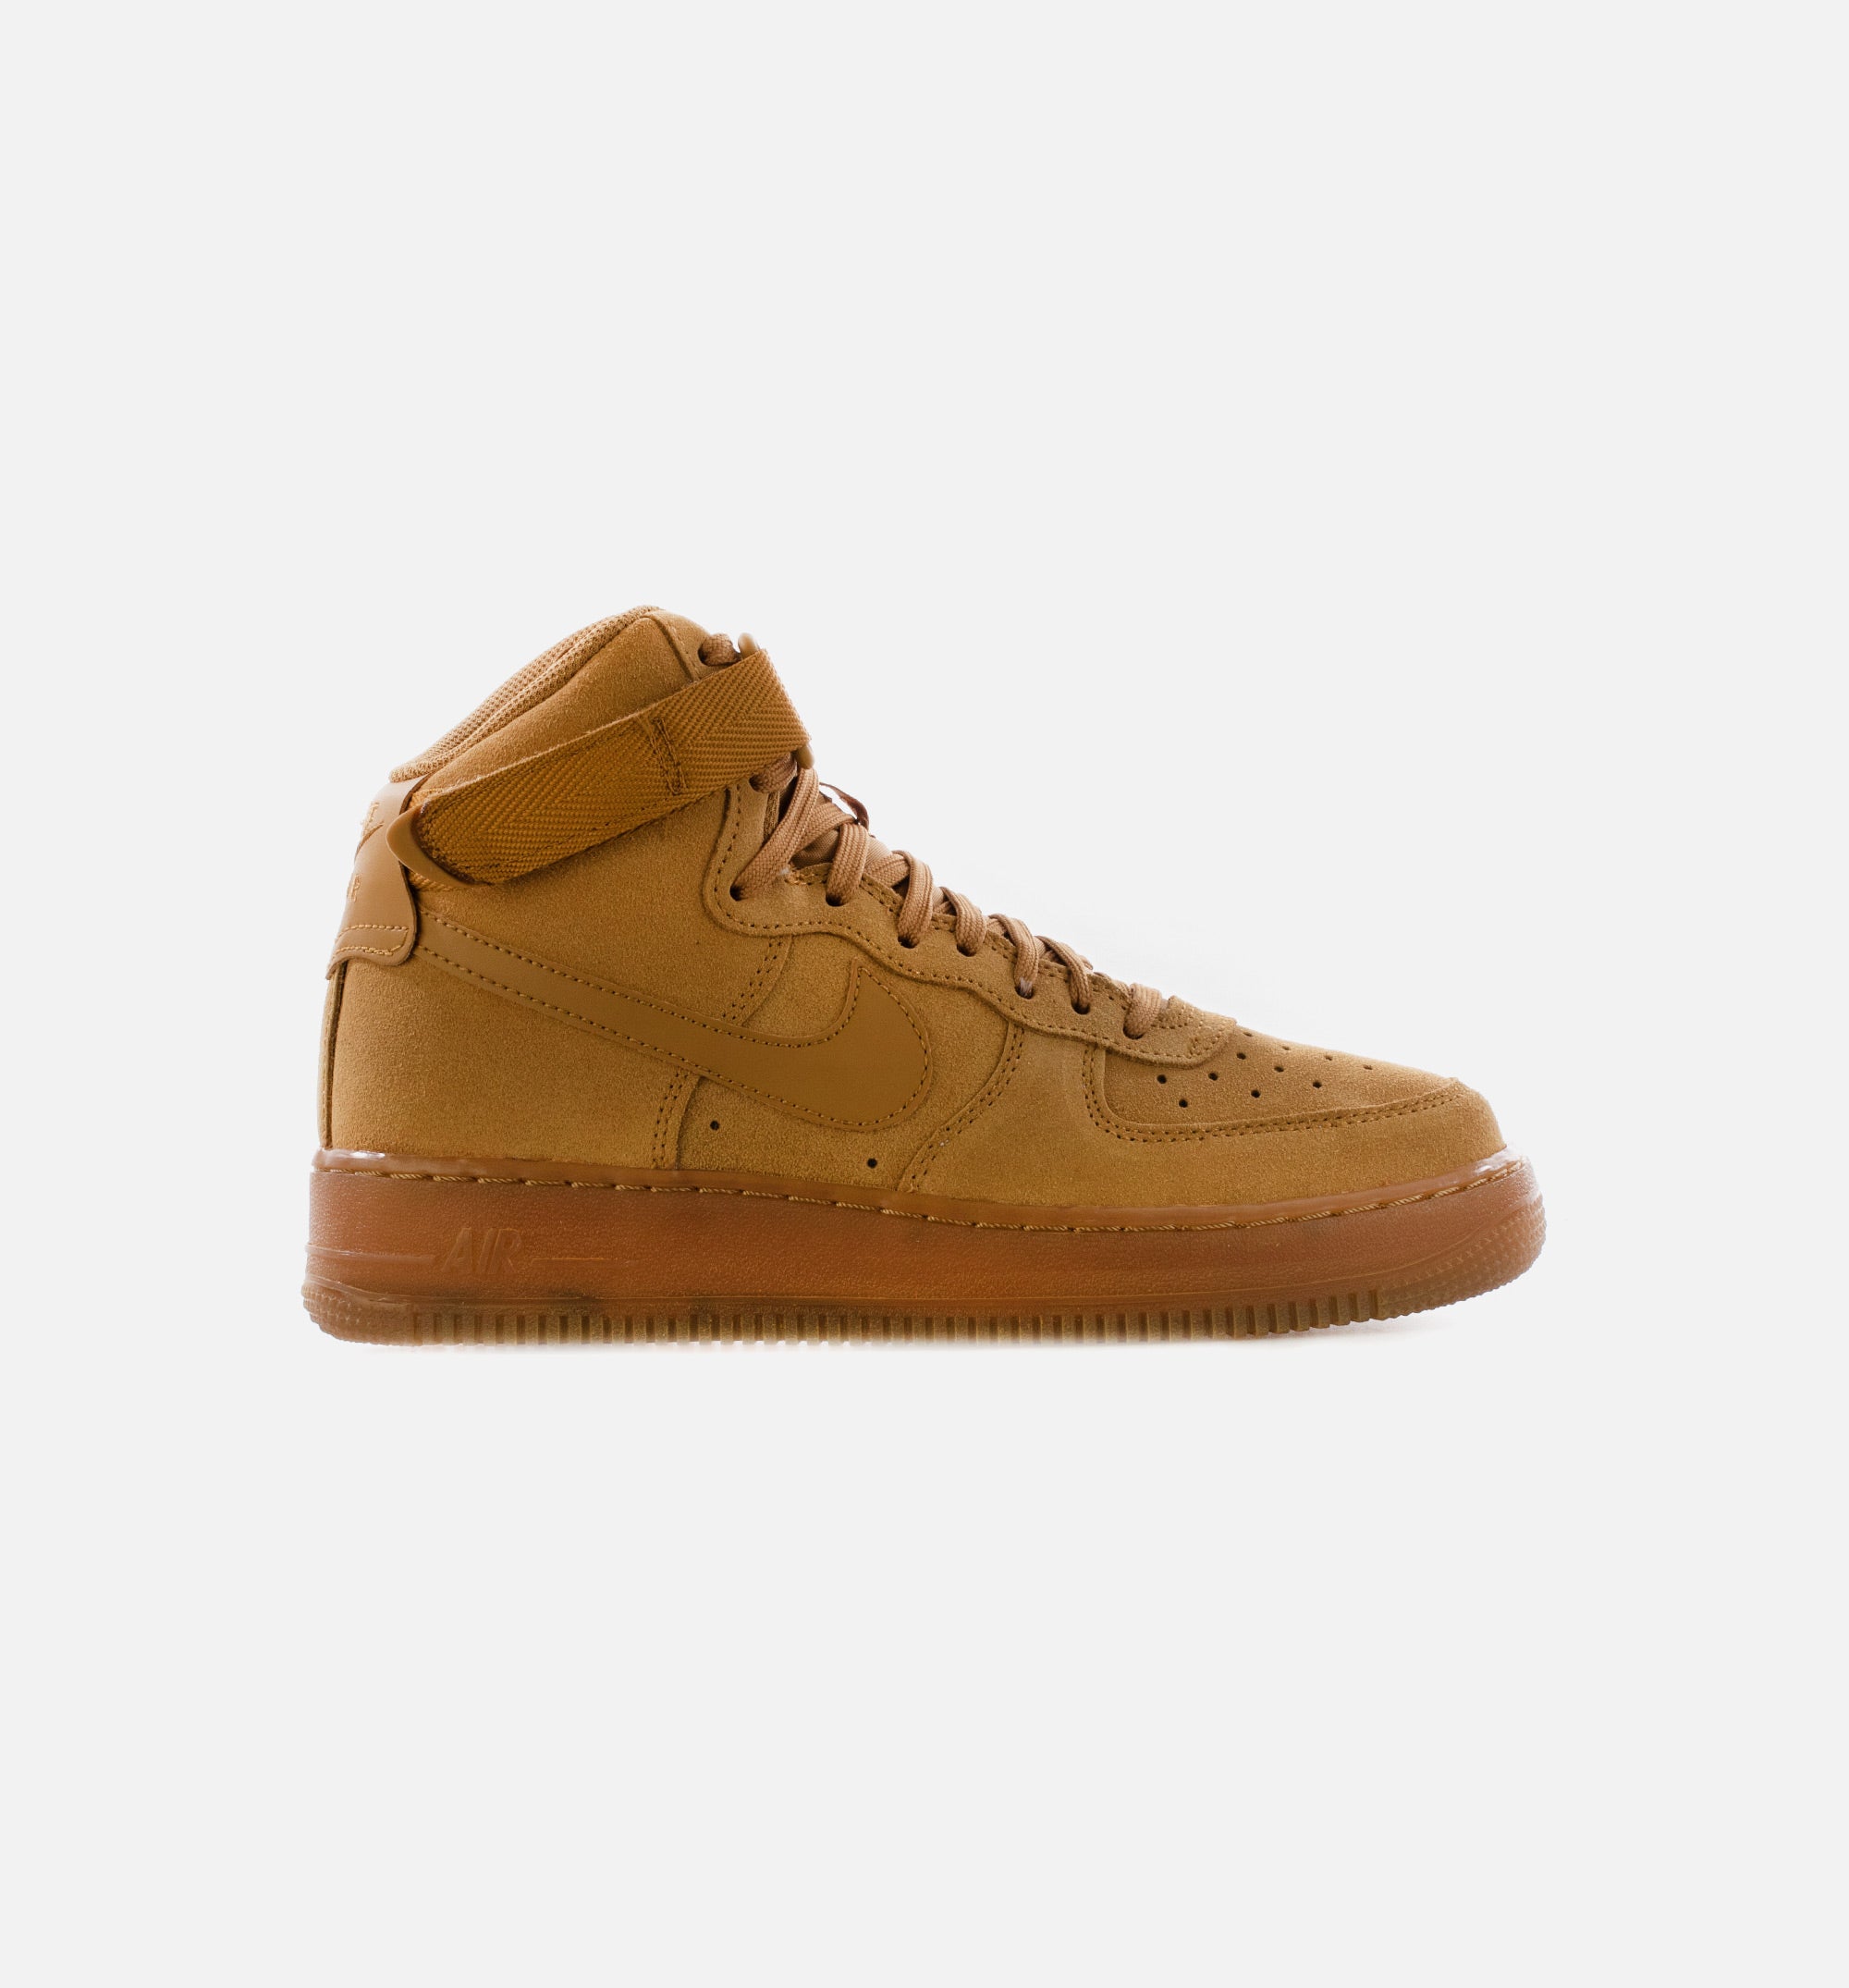 Nike Air Force 1 High LV8 Grade School Lifestyle Shoes Brown Wheat  CK0262-700 – Shoe Palace